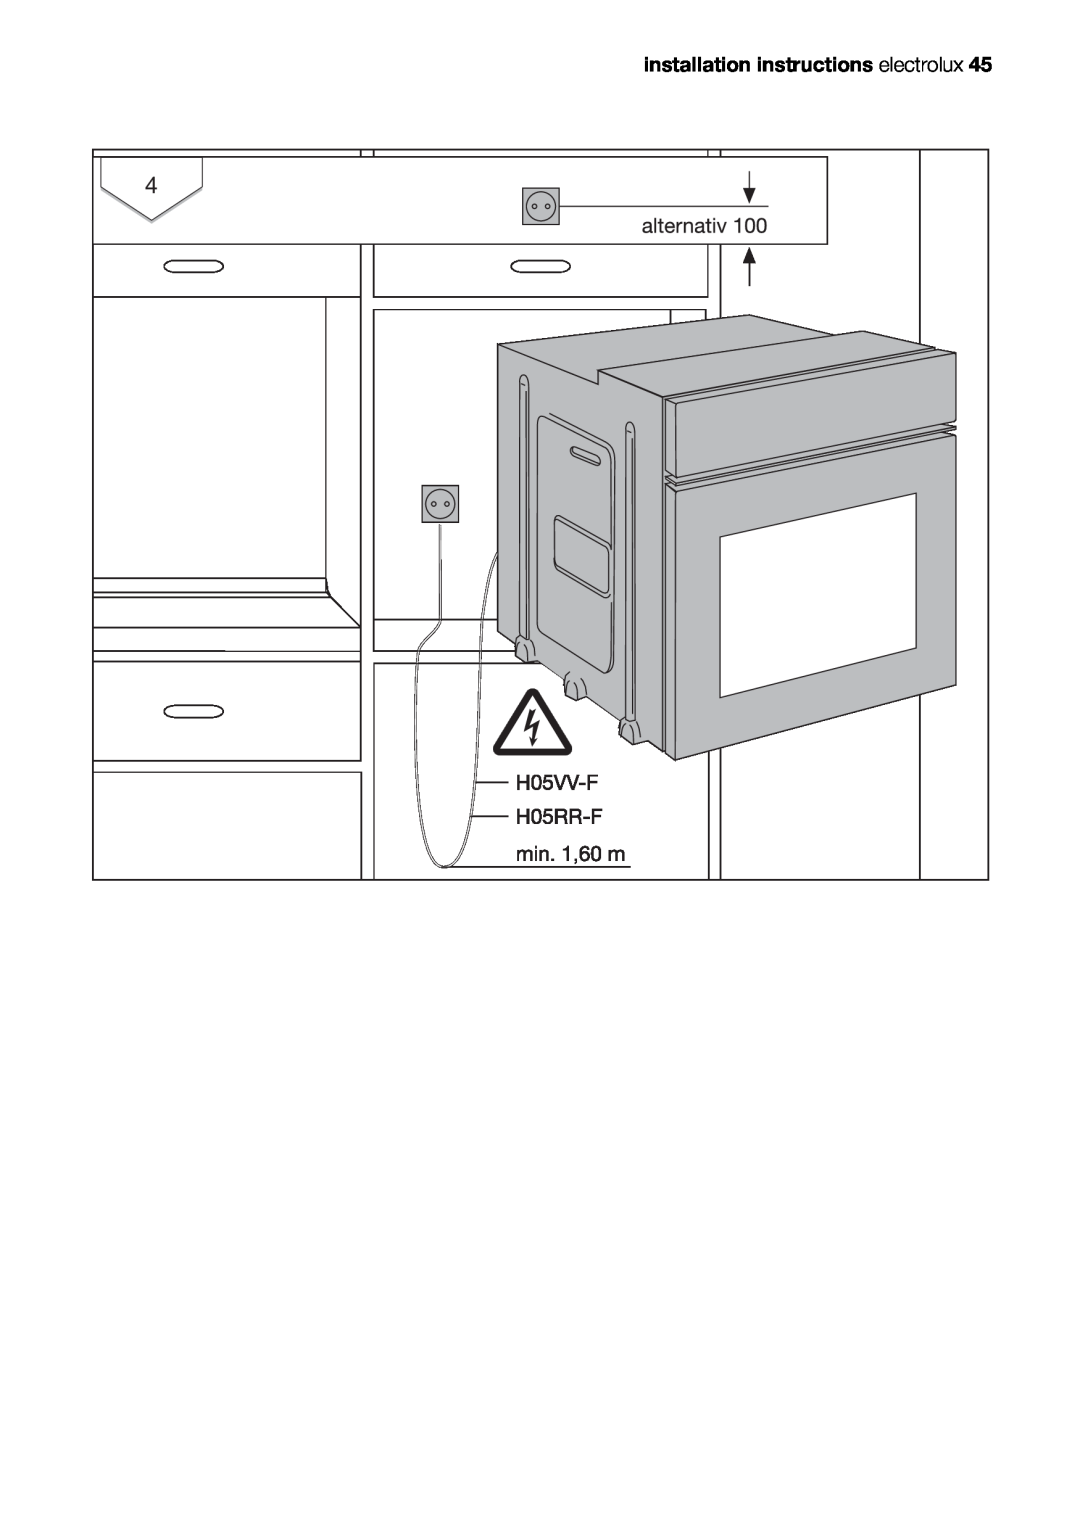 Electrolux EOB51000 user manual installation instructions electrolux 